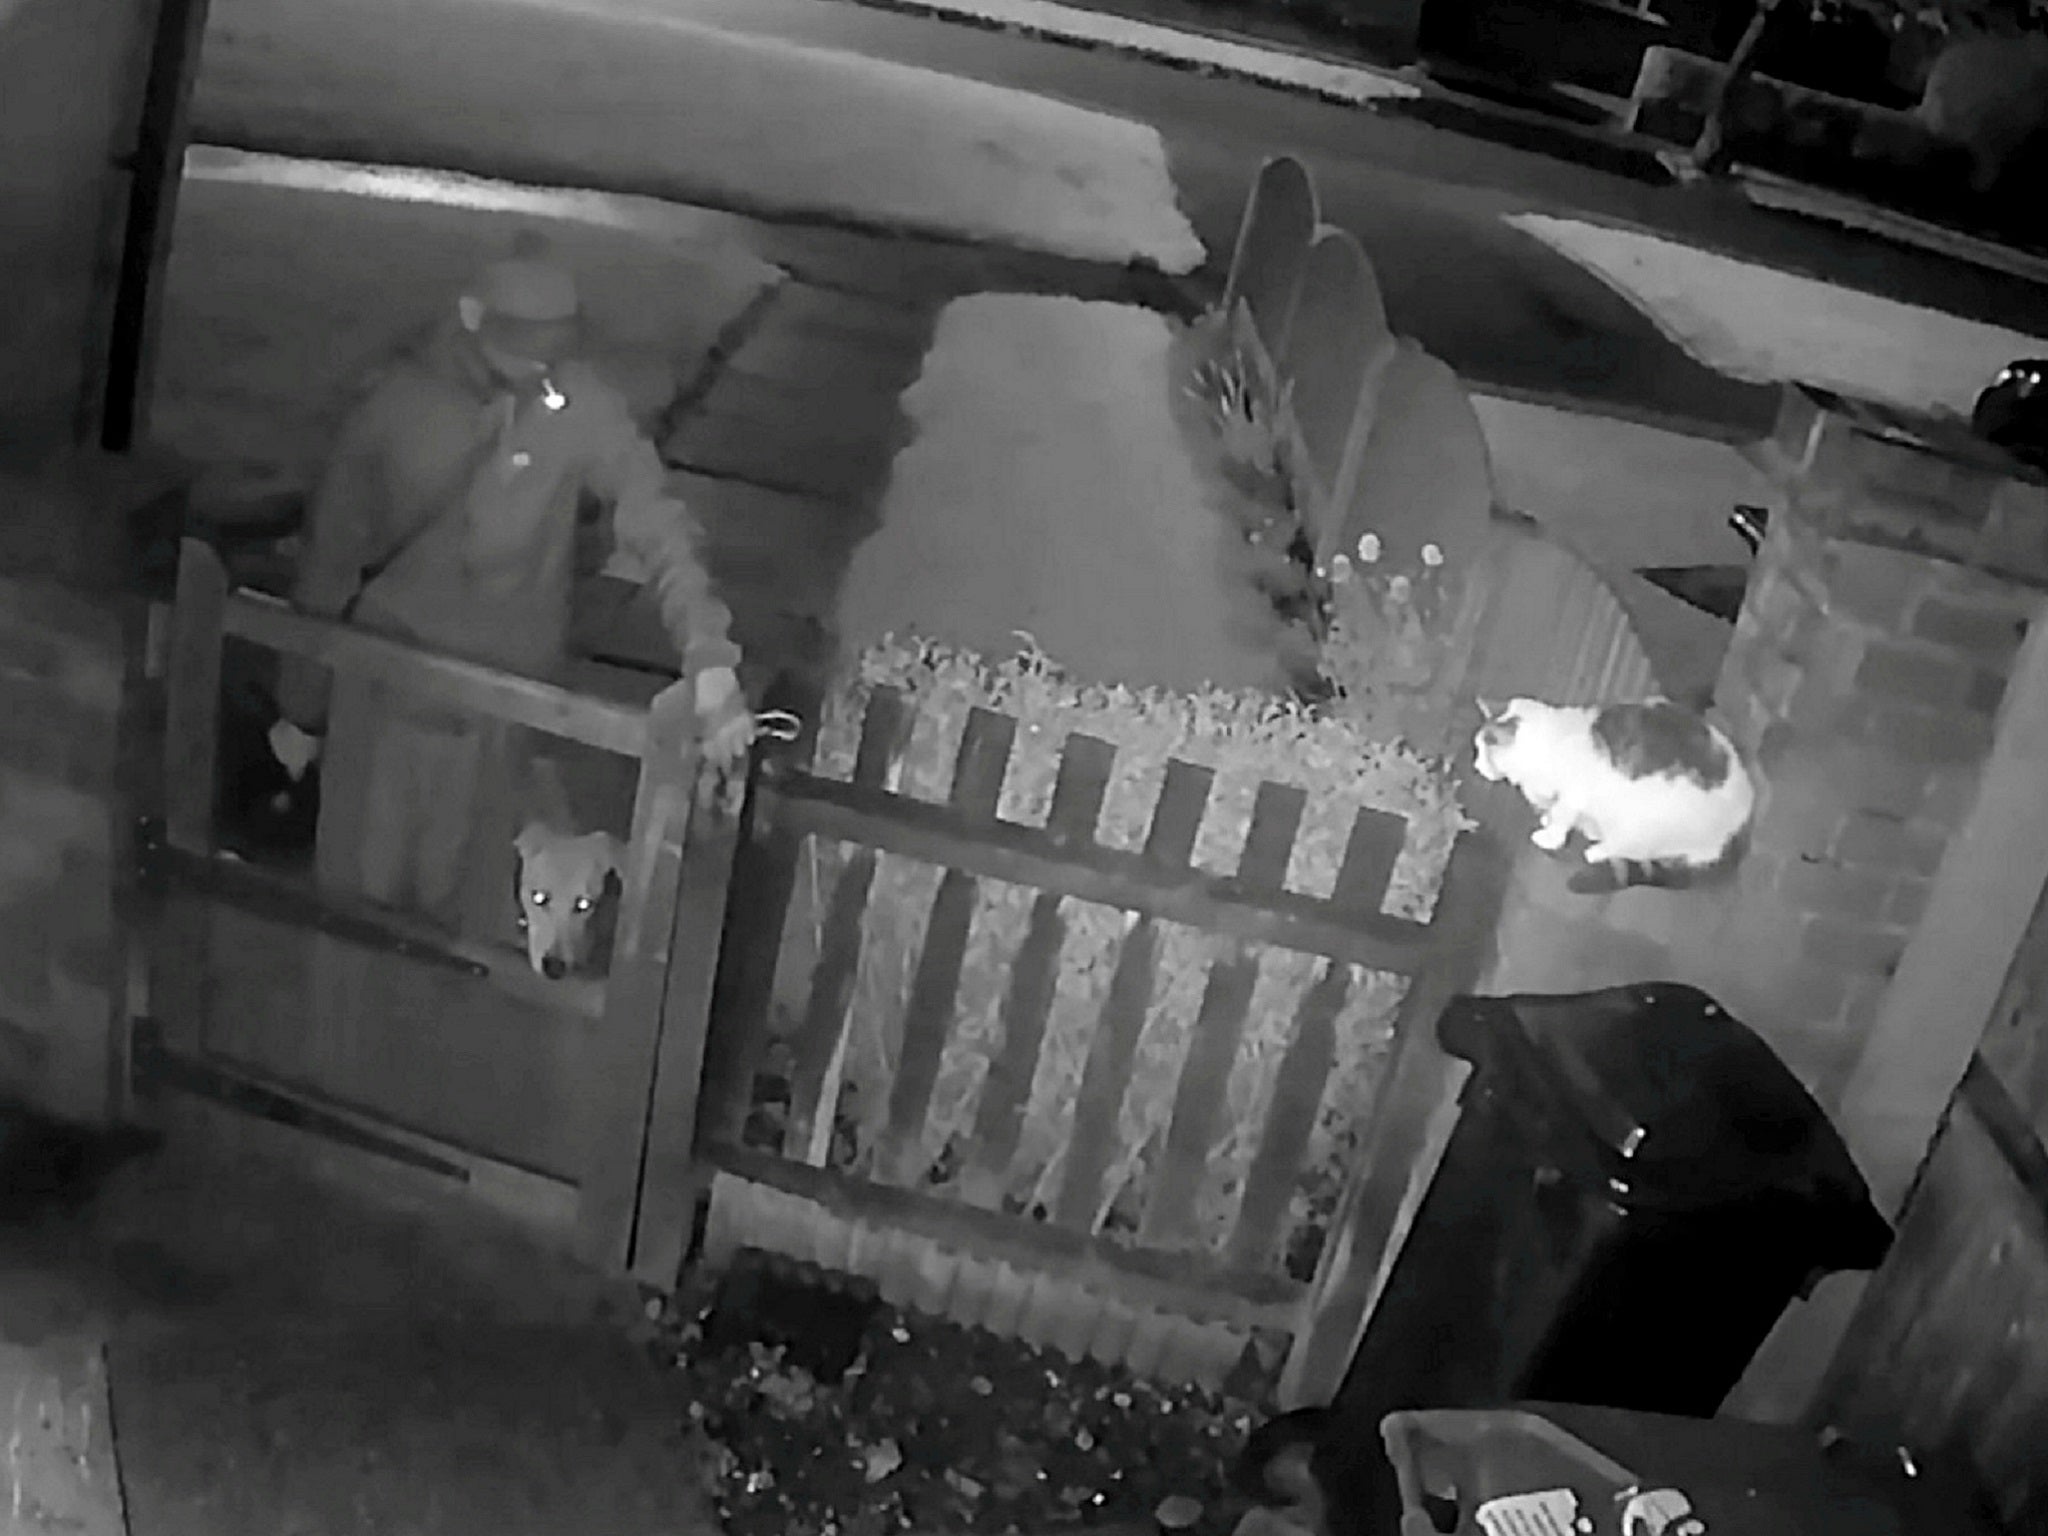 CCTV shows a man deliberately setting his dog on a pet cat in Walsall, West Midlands, on 23 October, 2019.